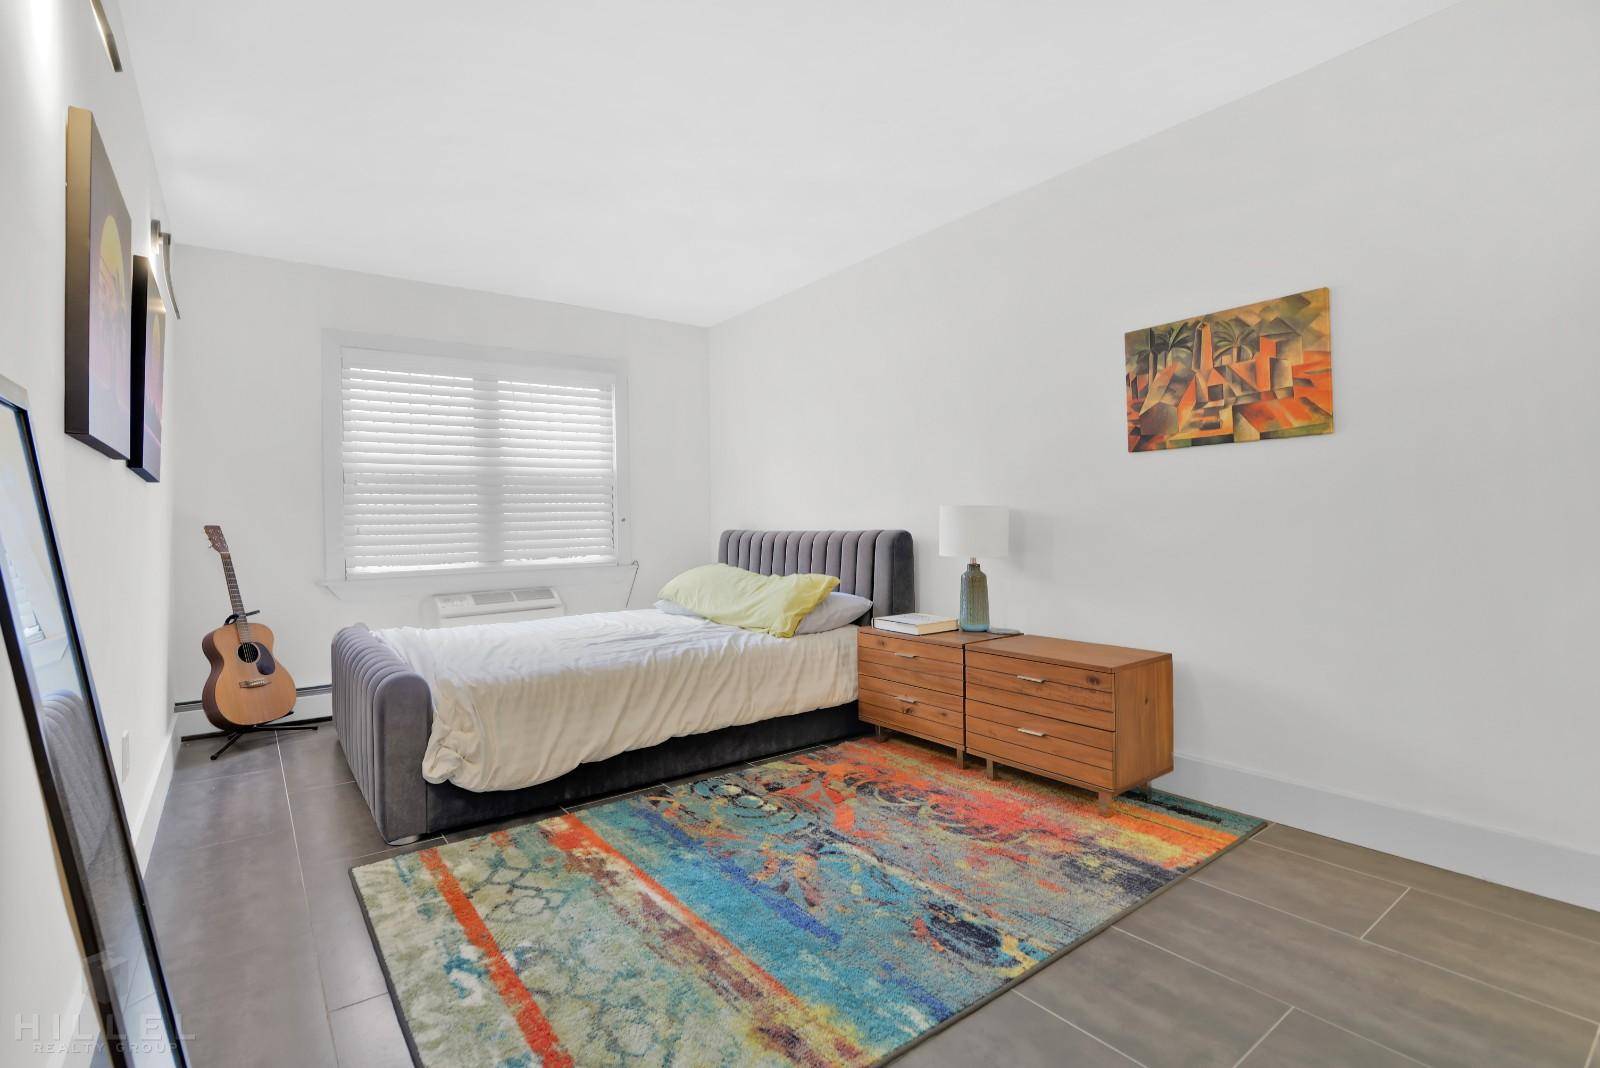 Welcome to this gorgeous 2 Family Home in the heart of Bushwick.